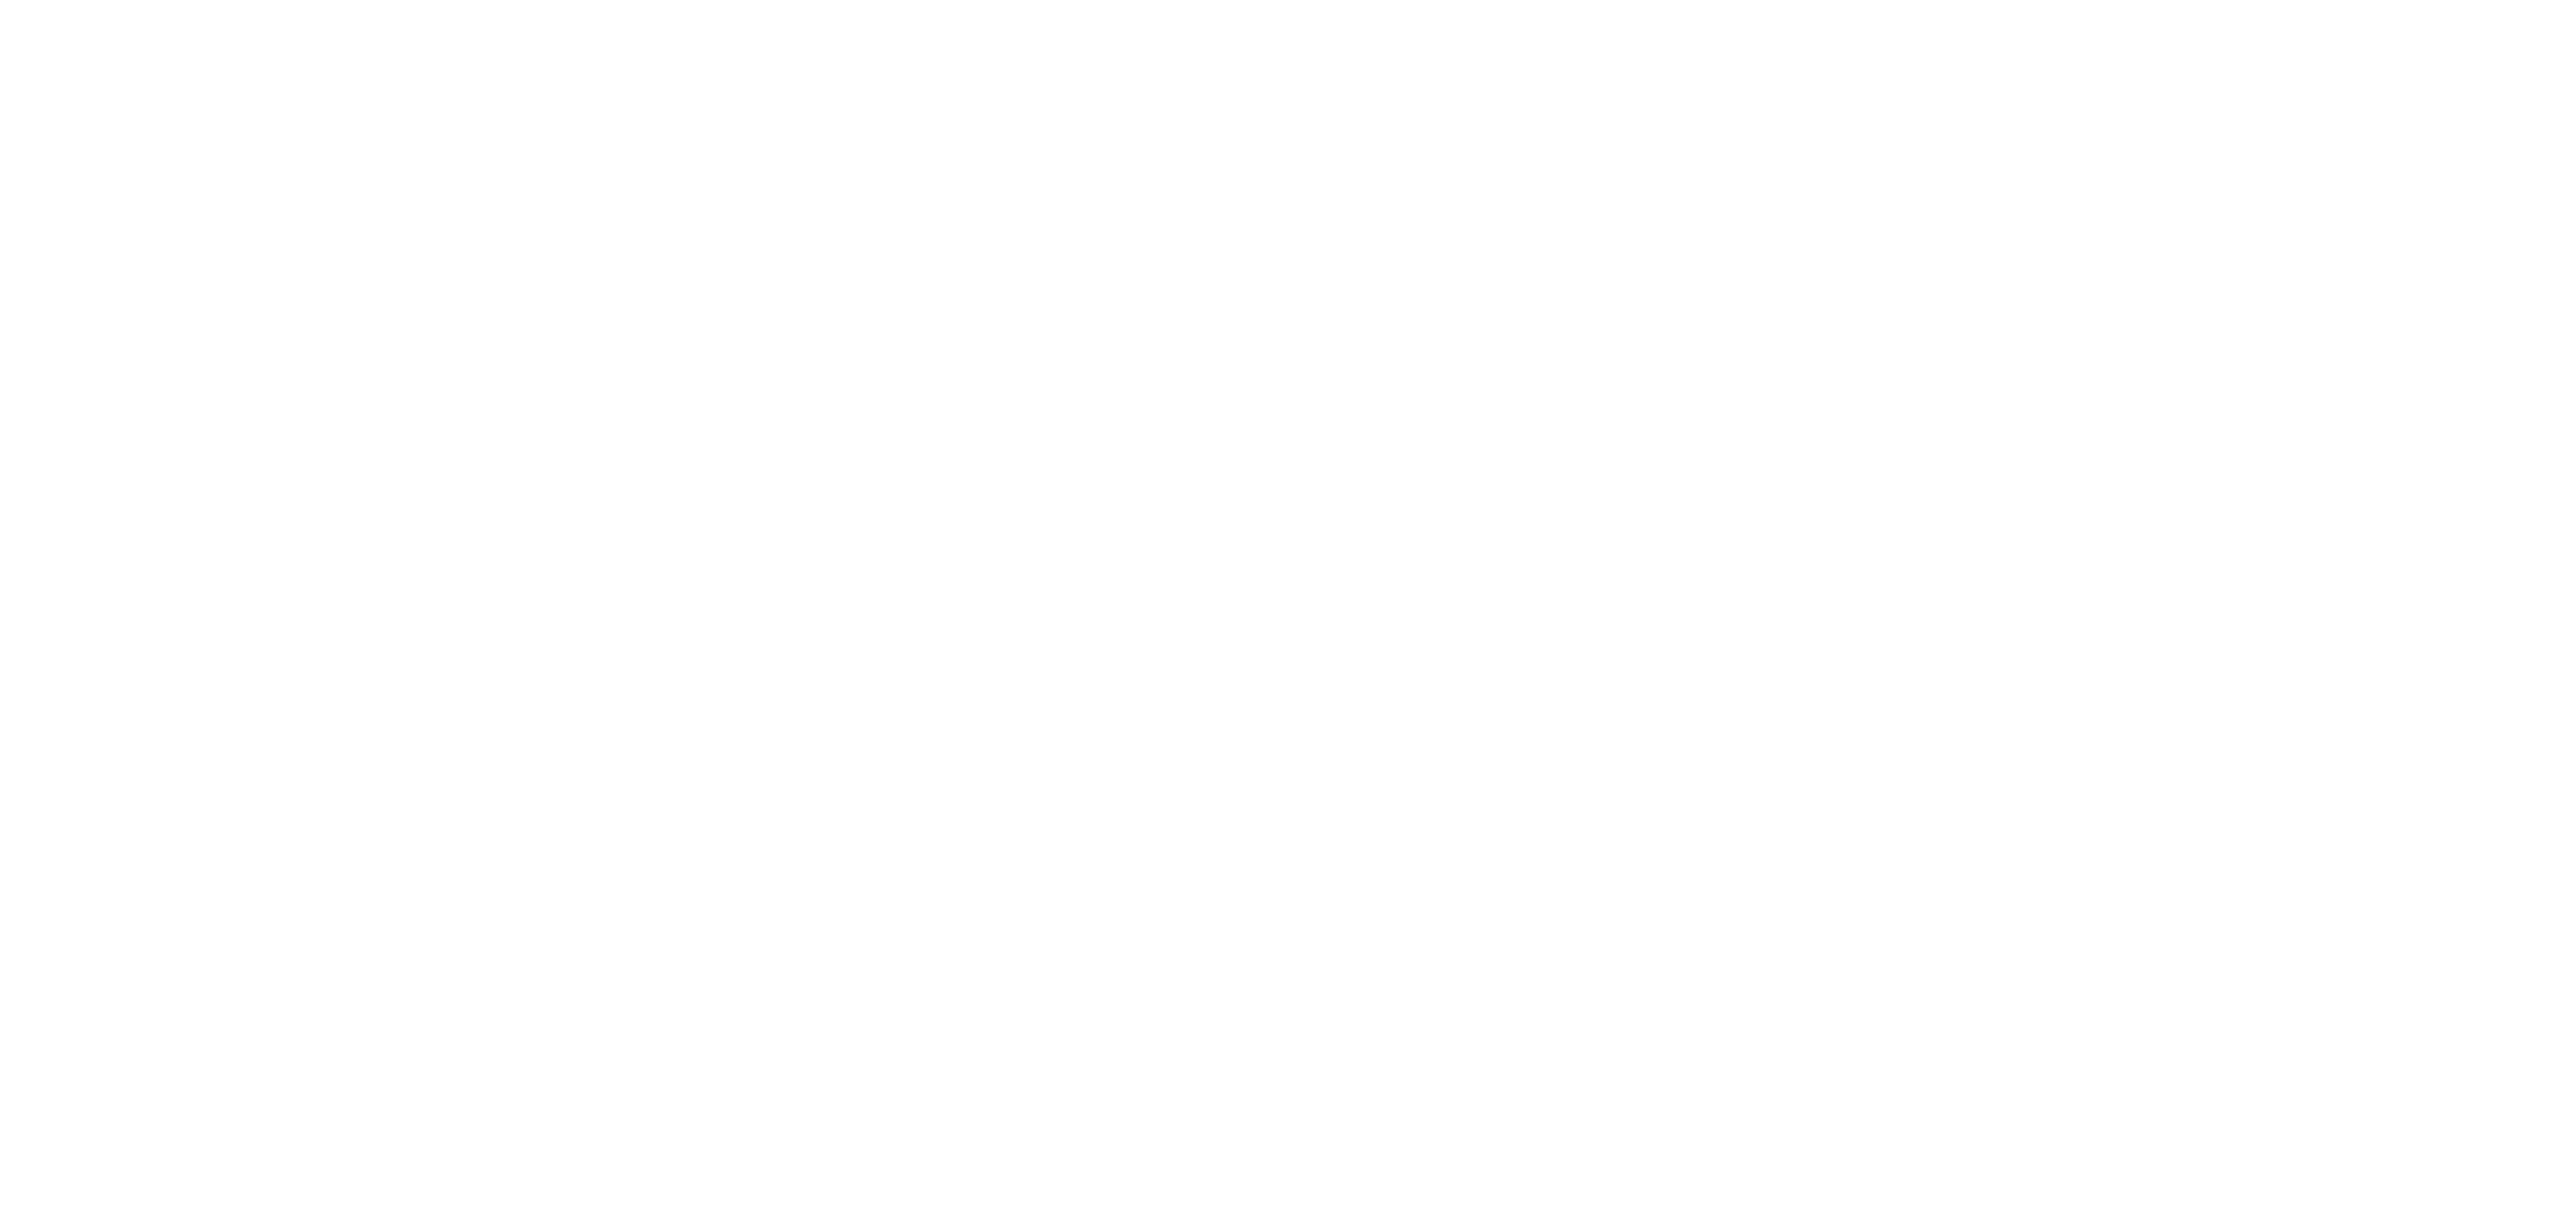  DruidShakespeare – Richard II, Henry IV & Henry V by William Shakespeare in a new adaptation by Mark O’Rowe directed by Garry Hynes in a co-production with Lincoln Center Festival NYC